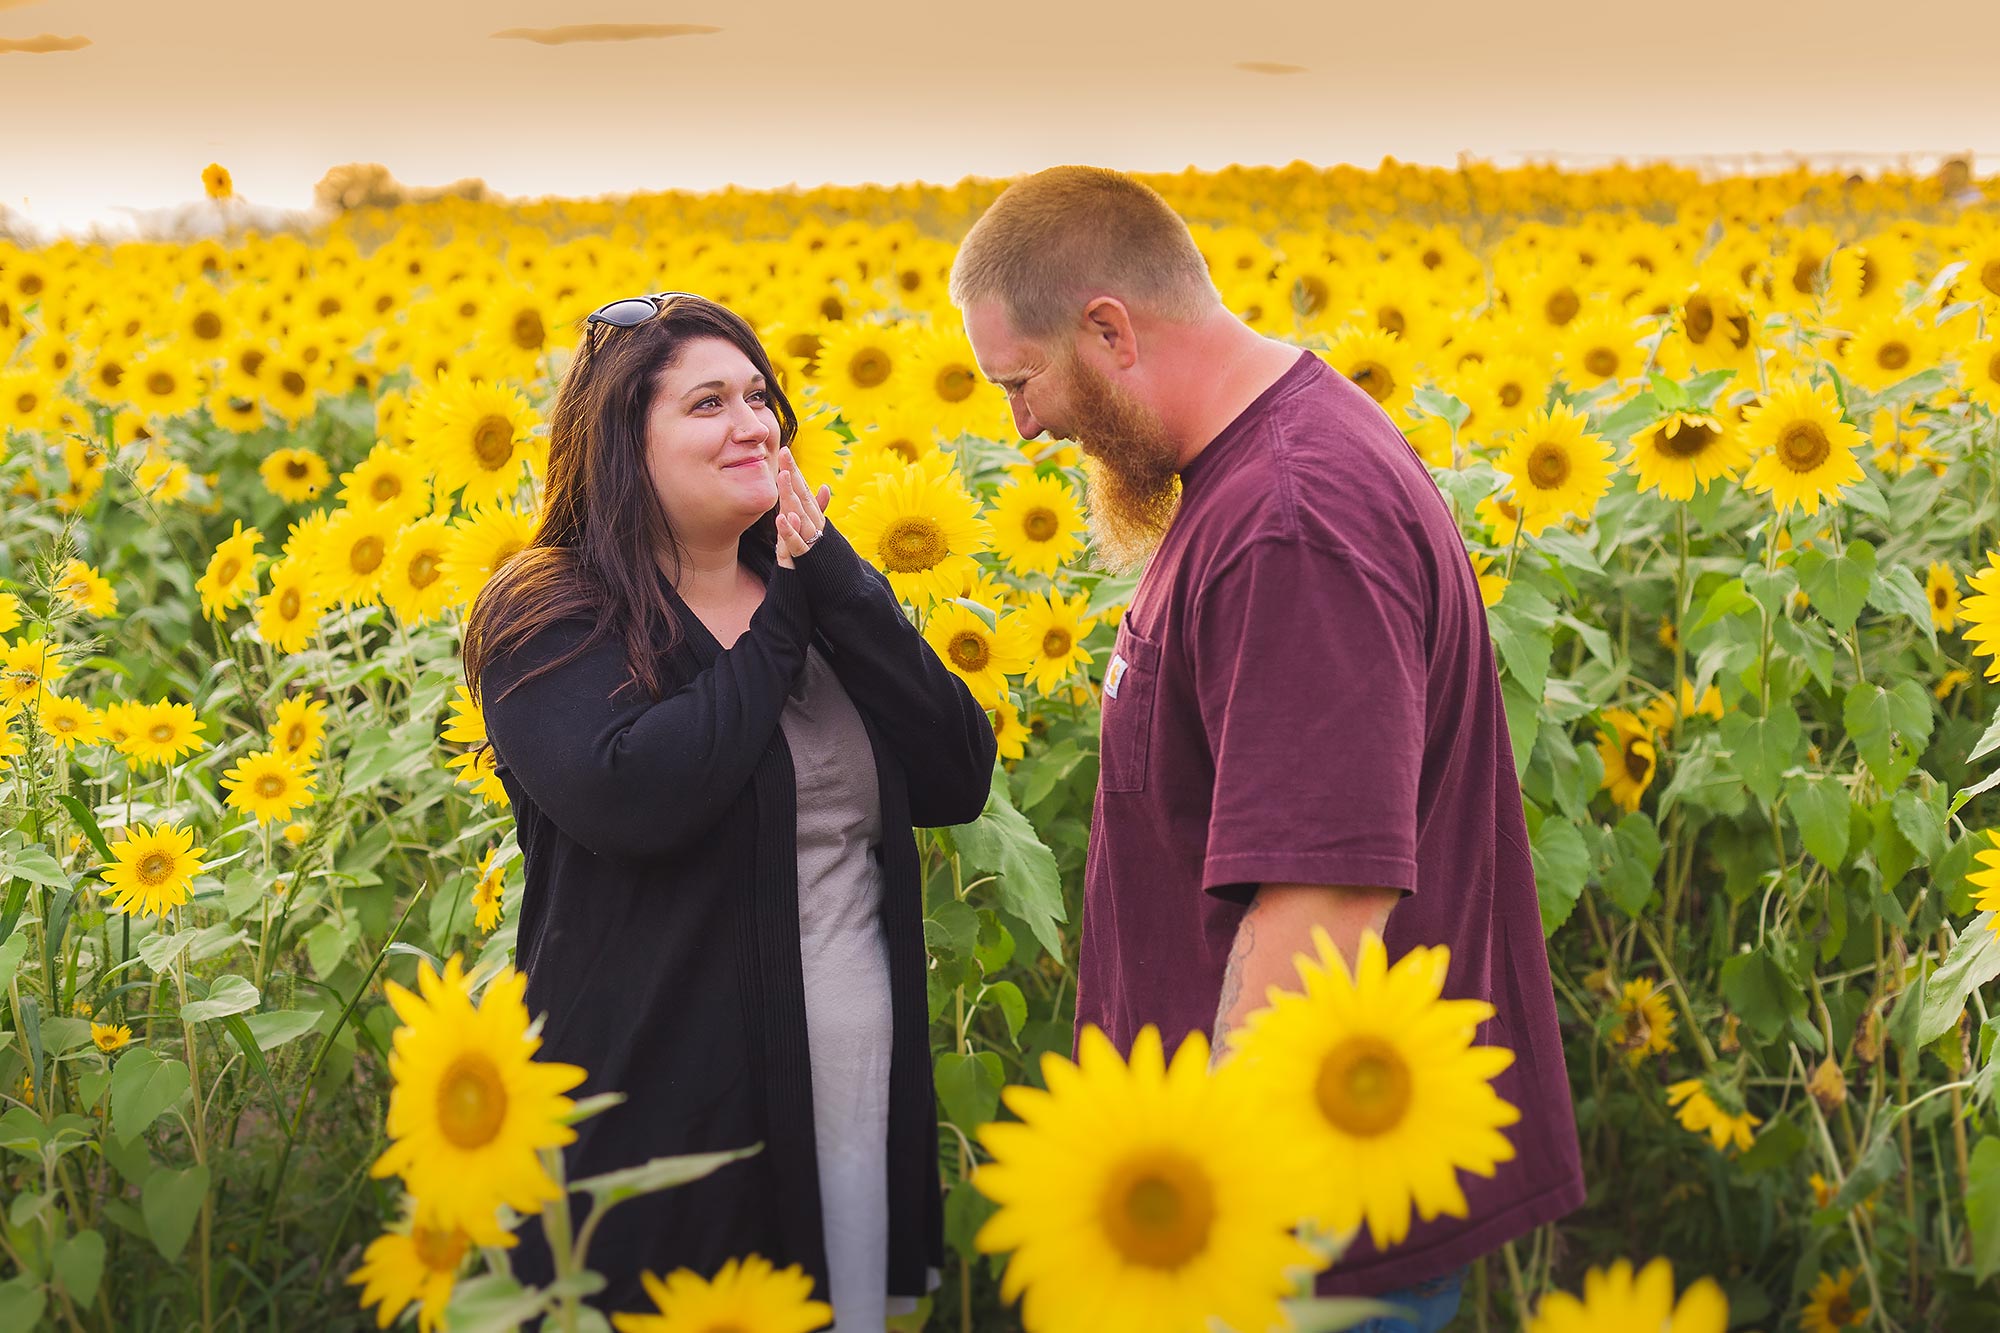 Colby Farm Sunflower Engagement Proposal | Stephen Grant Photography